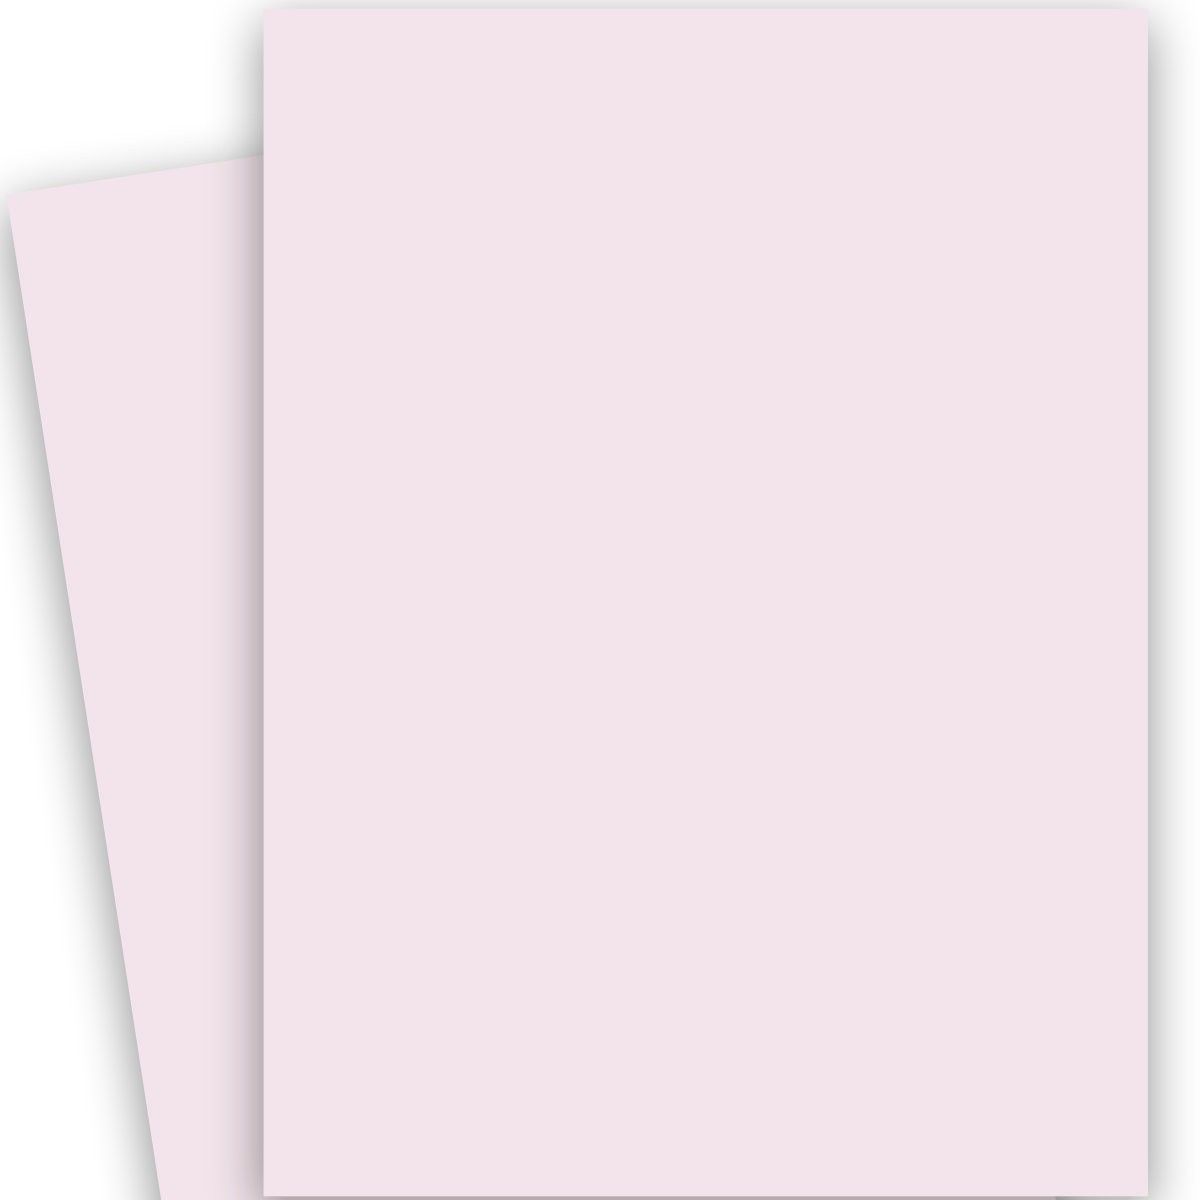 Basic WHITE (Lightweight) Card Stock Paper - 8.5 x 11 - 65lb Cover (176gsm)